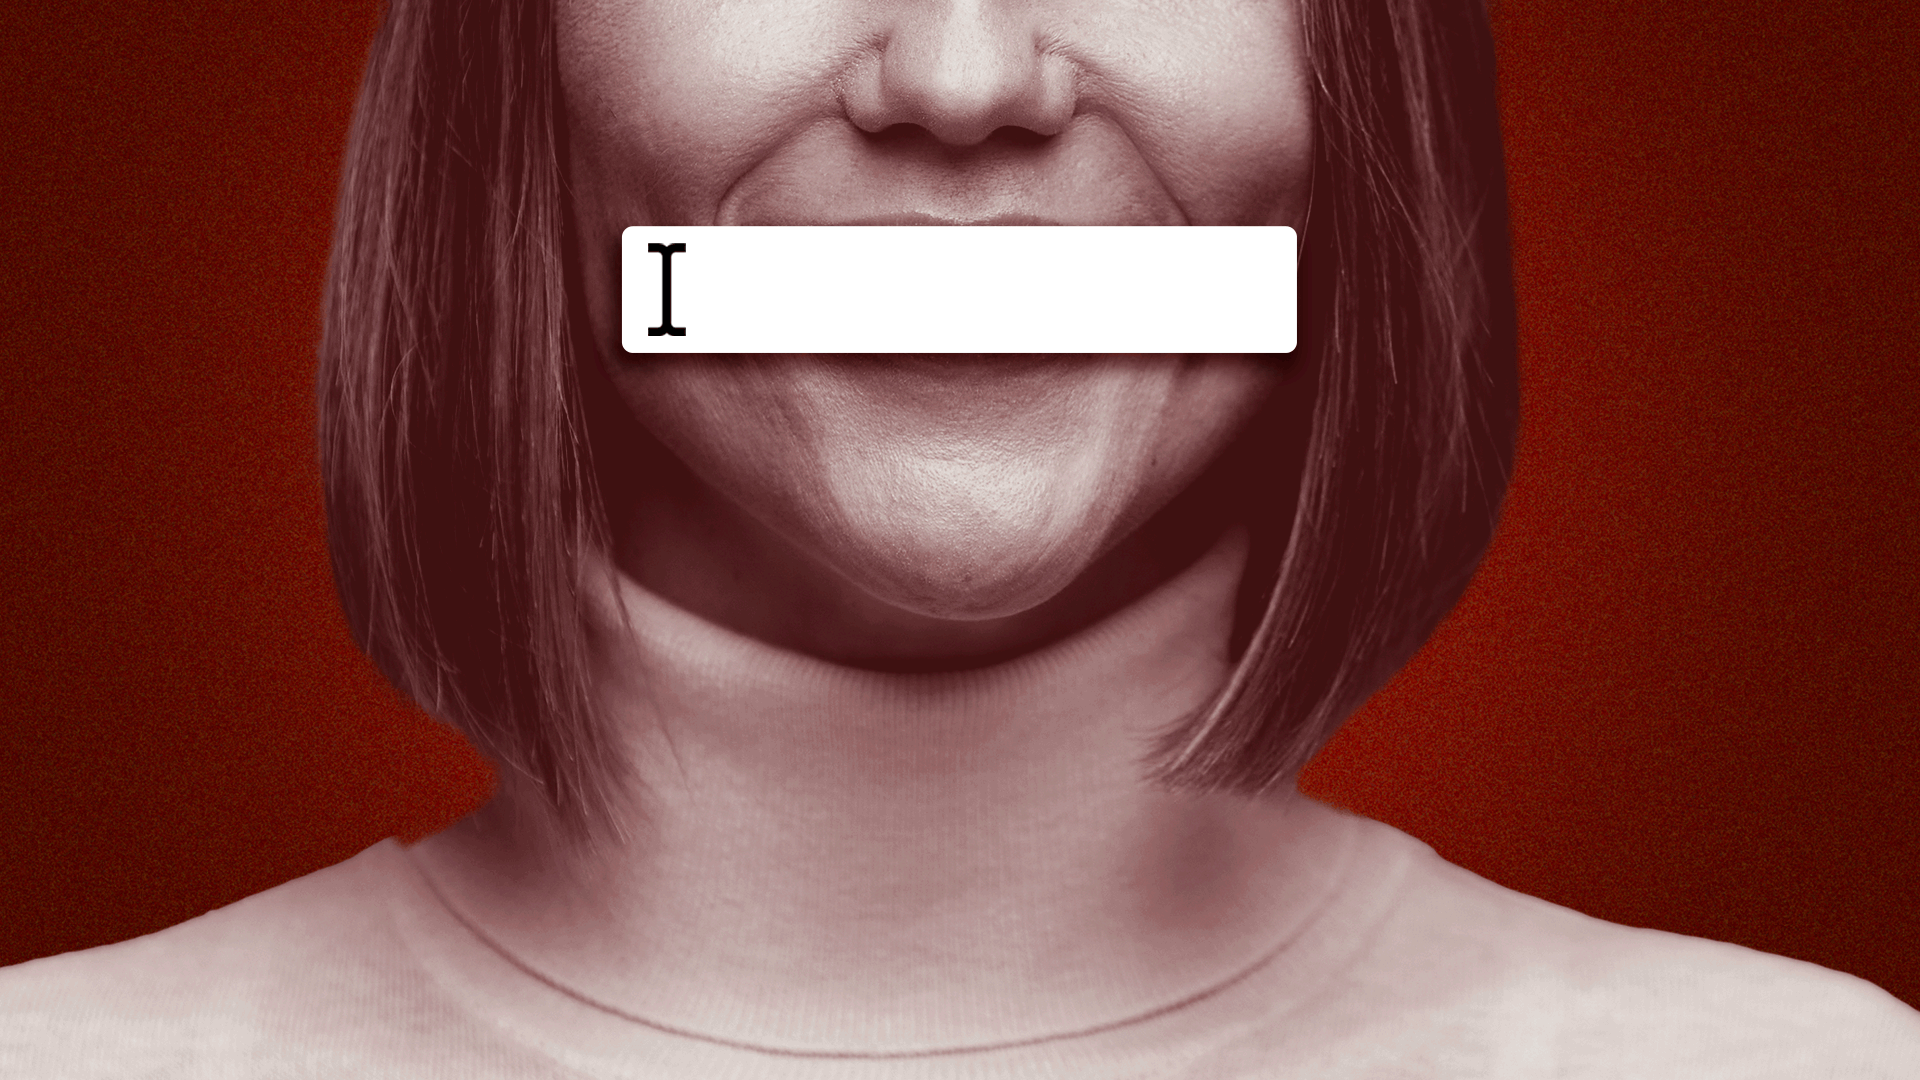 Illustration of a woman with a blinking cursor over and text box her mouth.